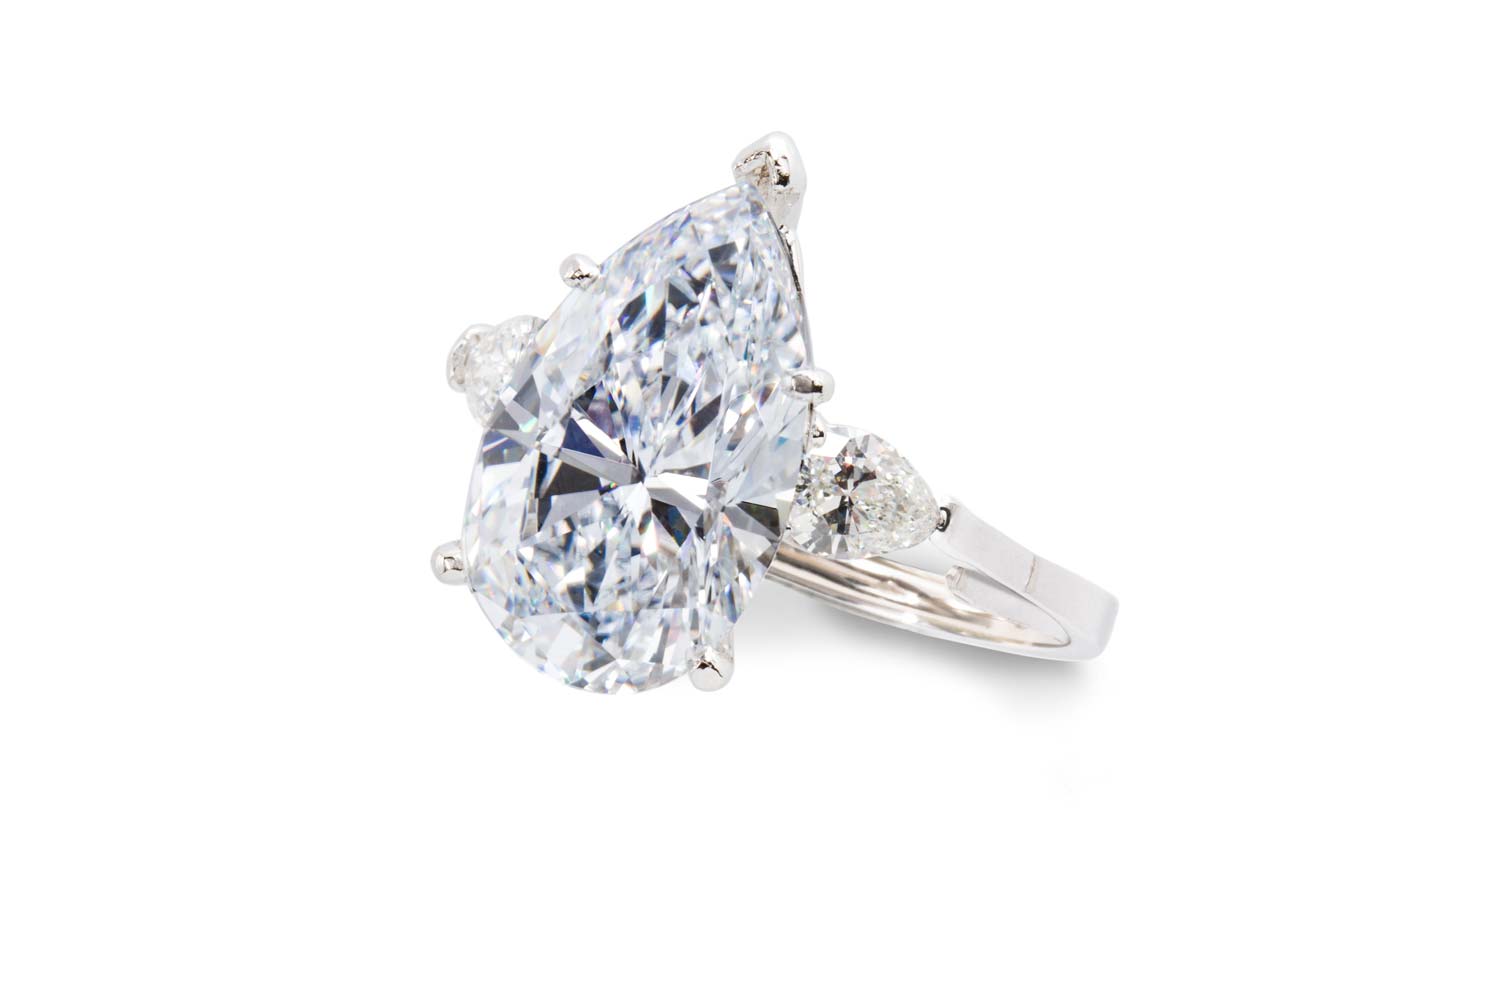 Clars&#8217; March 20-21 auction features dazzling 8.58-carat diamond ring